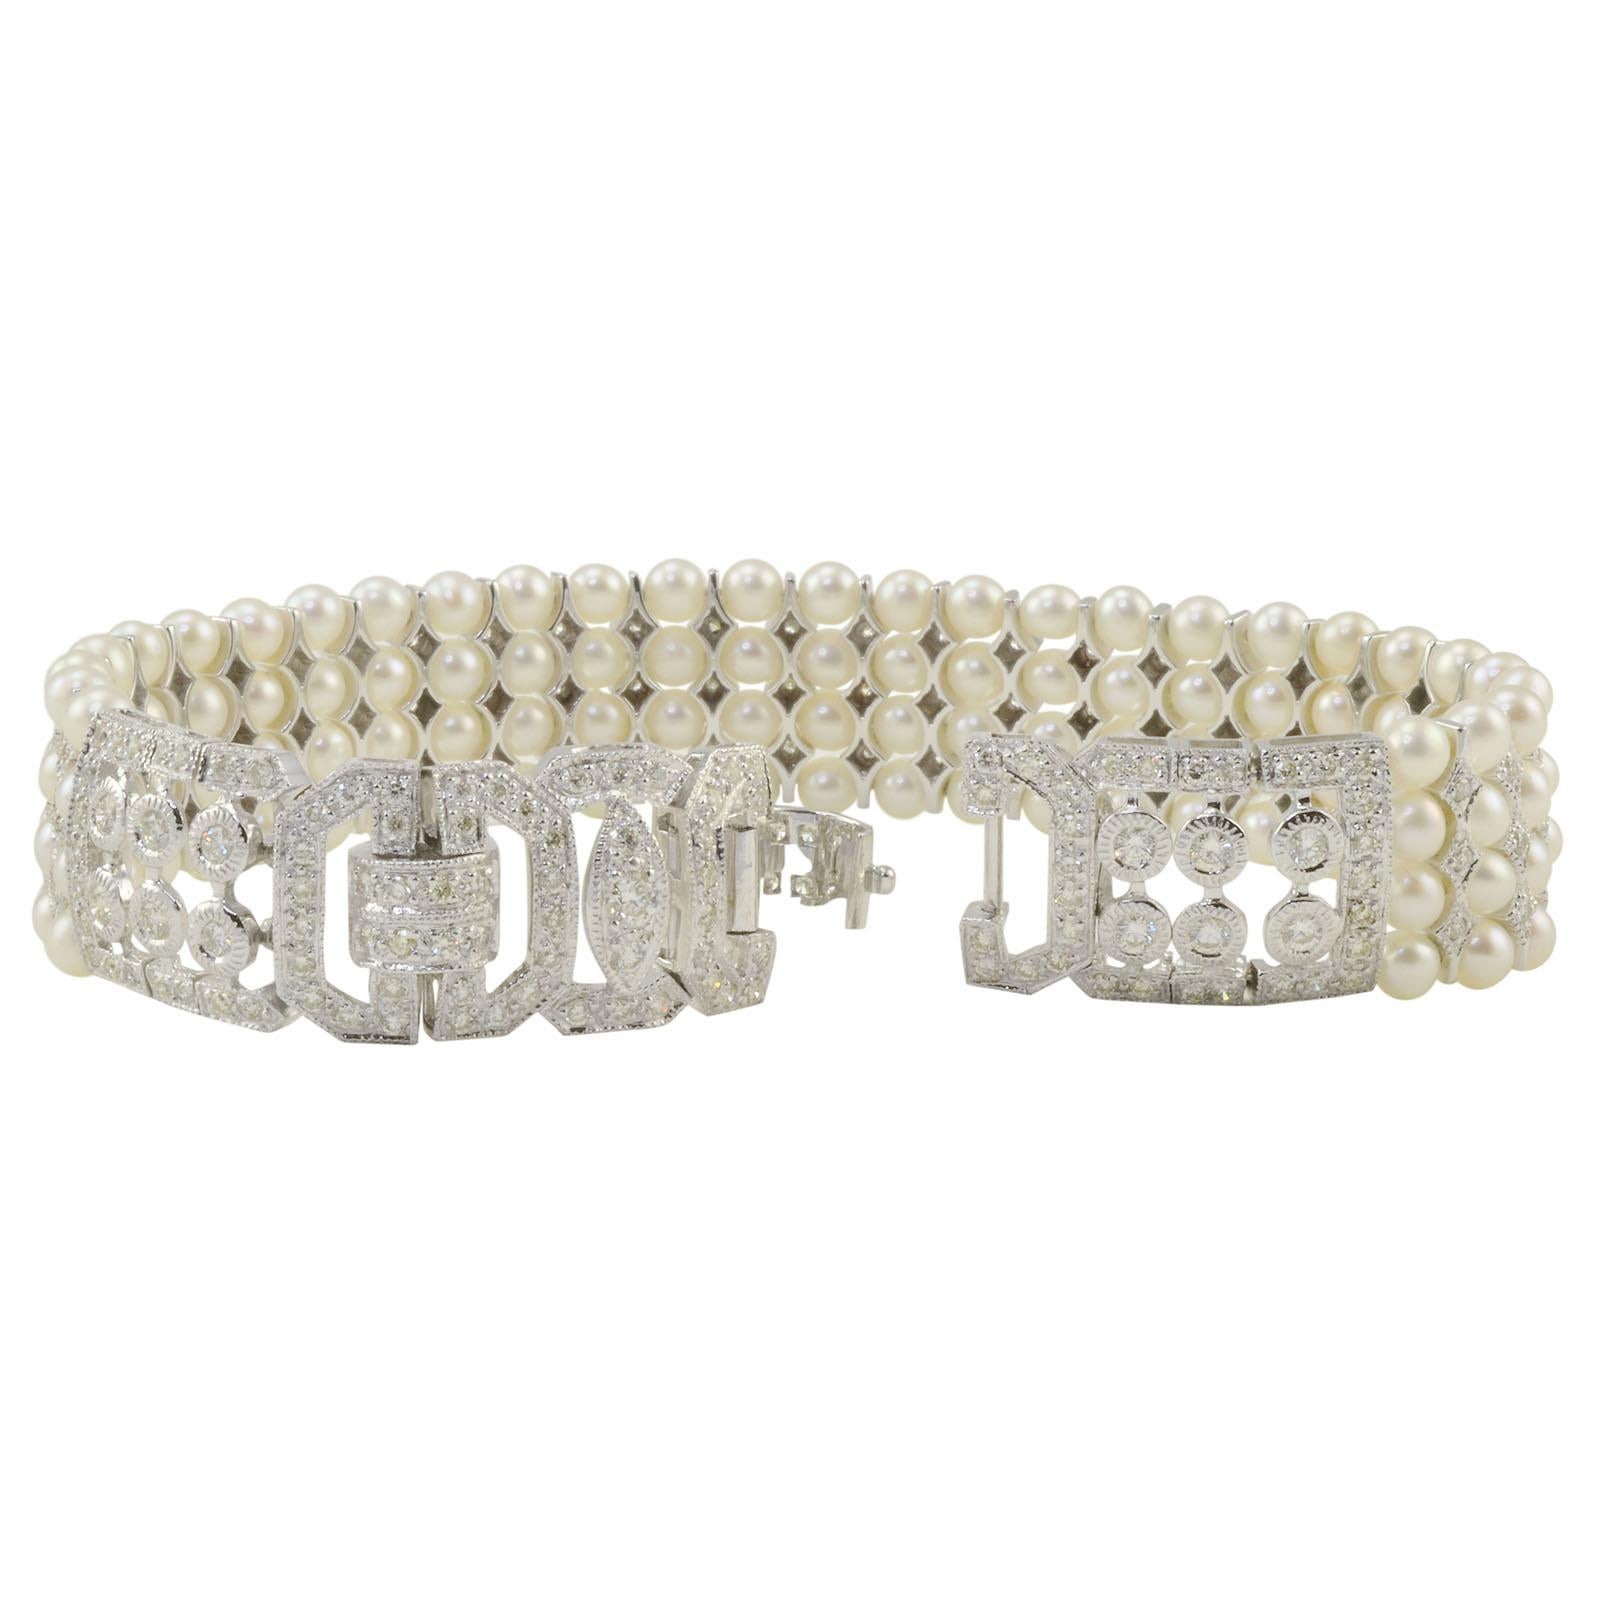 Estate 3.50 CTW diamond and four strand pearl bracelet. This 7 inch 18 karat white gold bracelet has round diamonds at approximately 3.50 carat total weight VS-SI clarity H-I color and four strands of natural Japanese pearls. This pearl and diamond